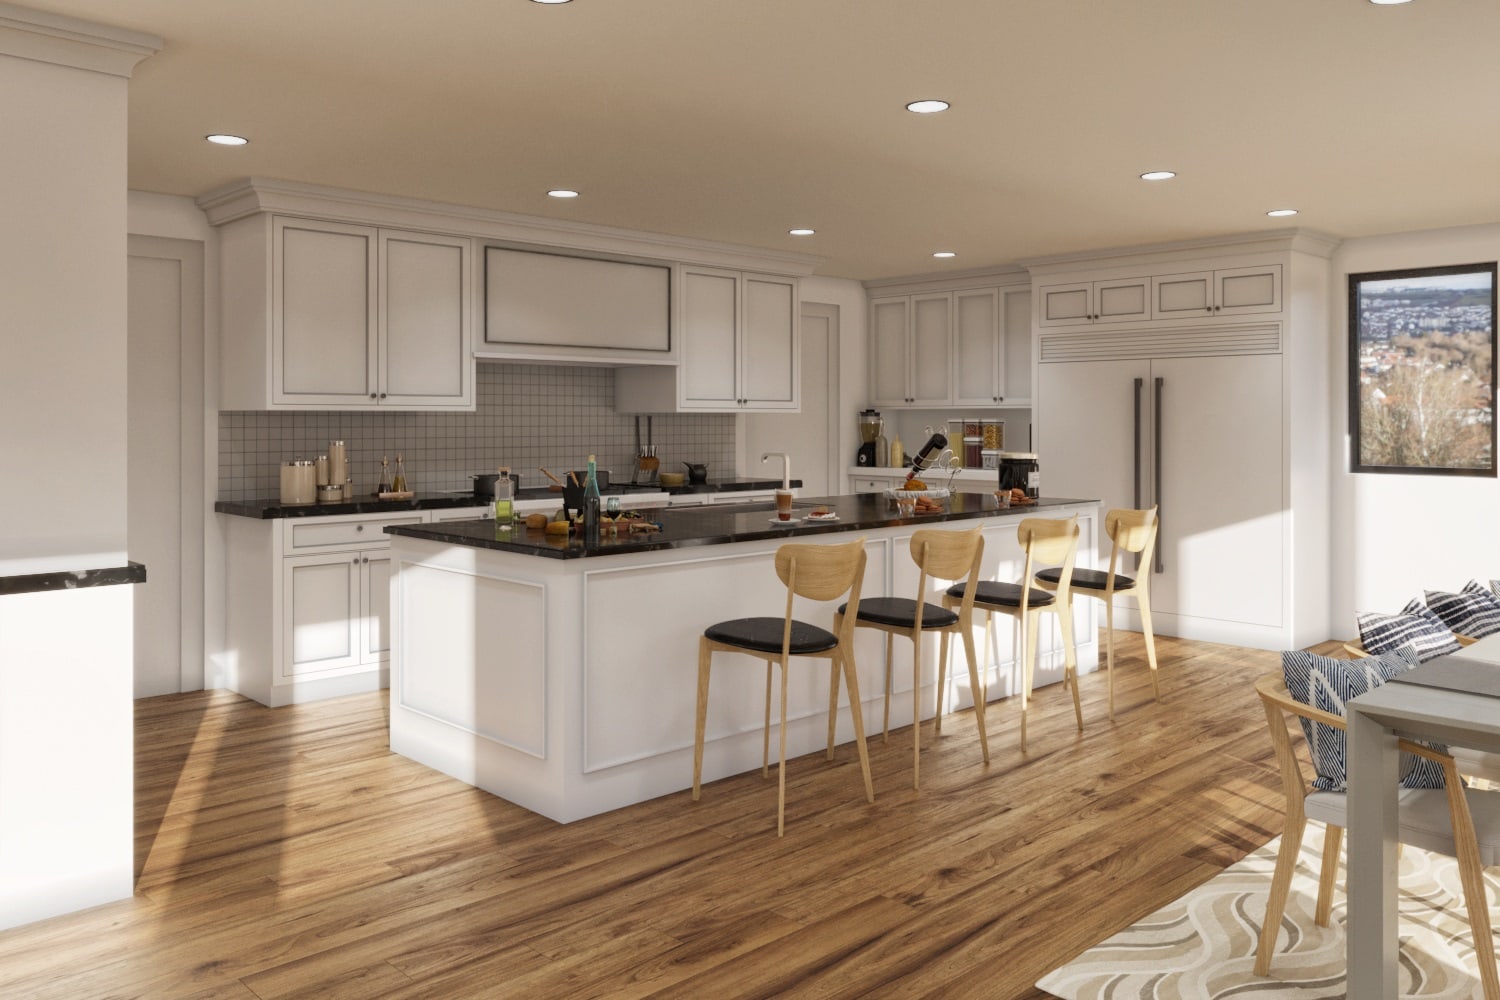 Residence Kitchen View 1 Interior Rendering in CT, USA